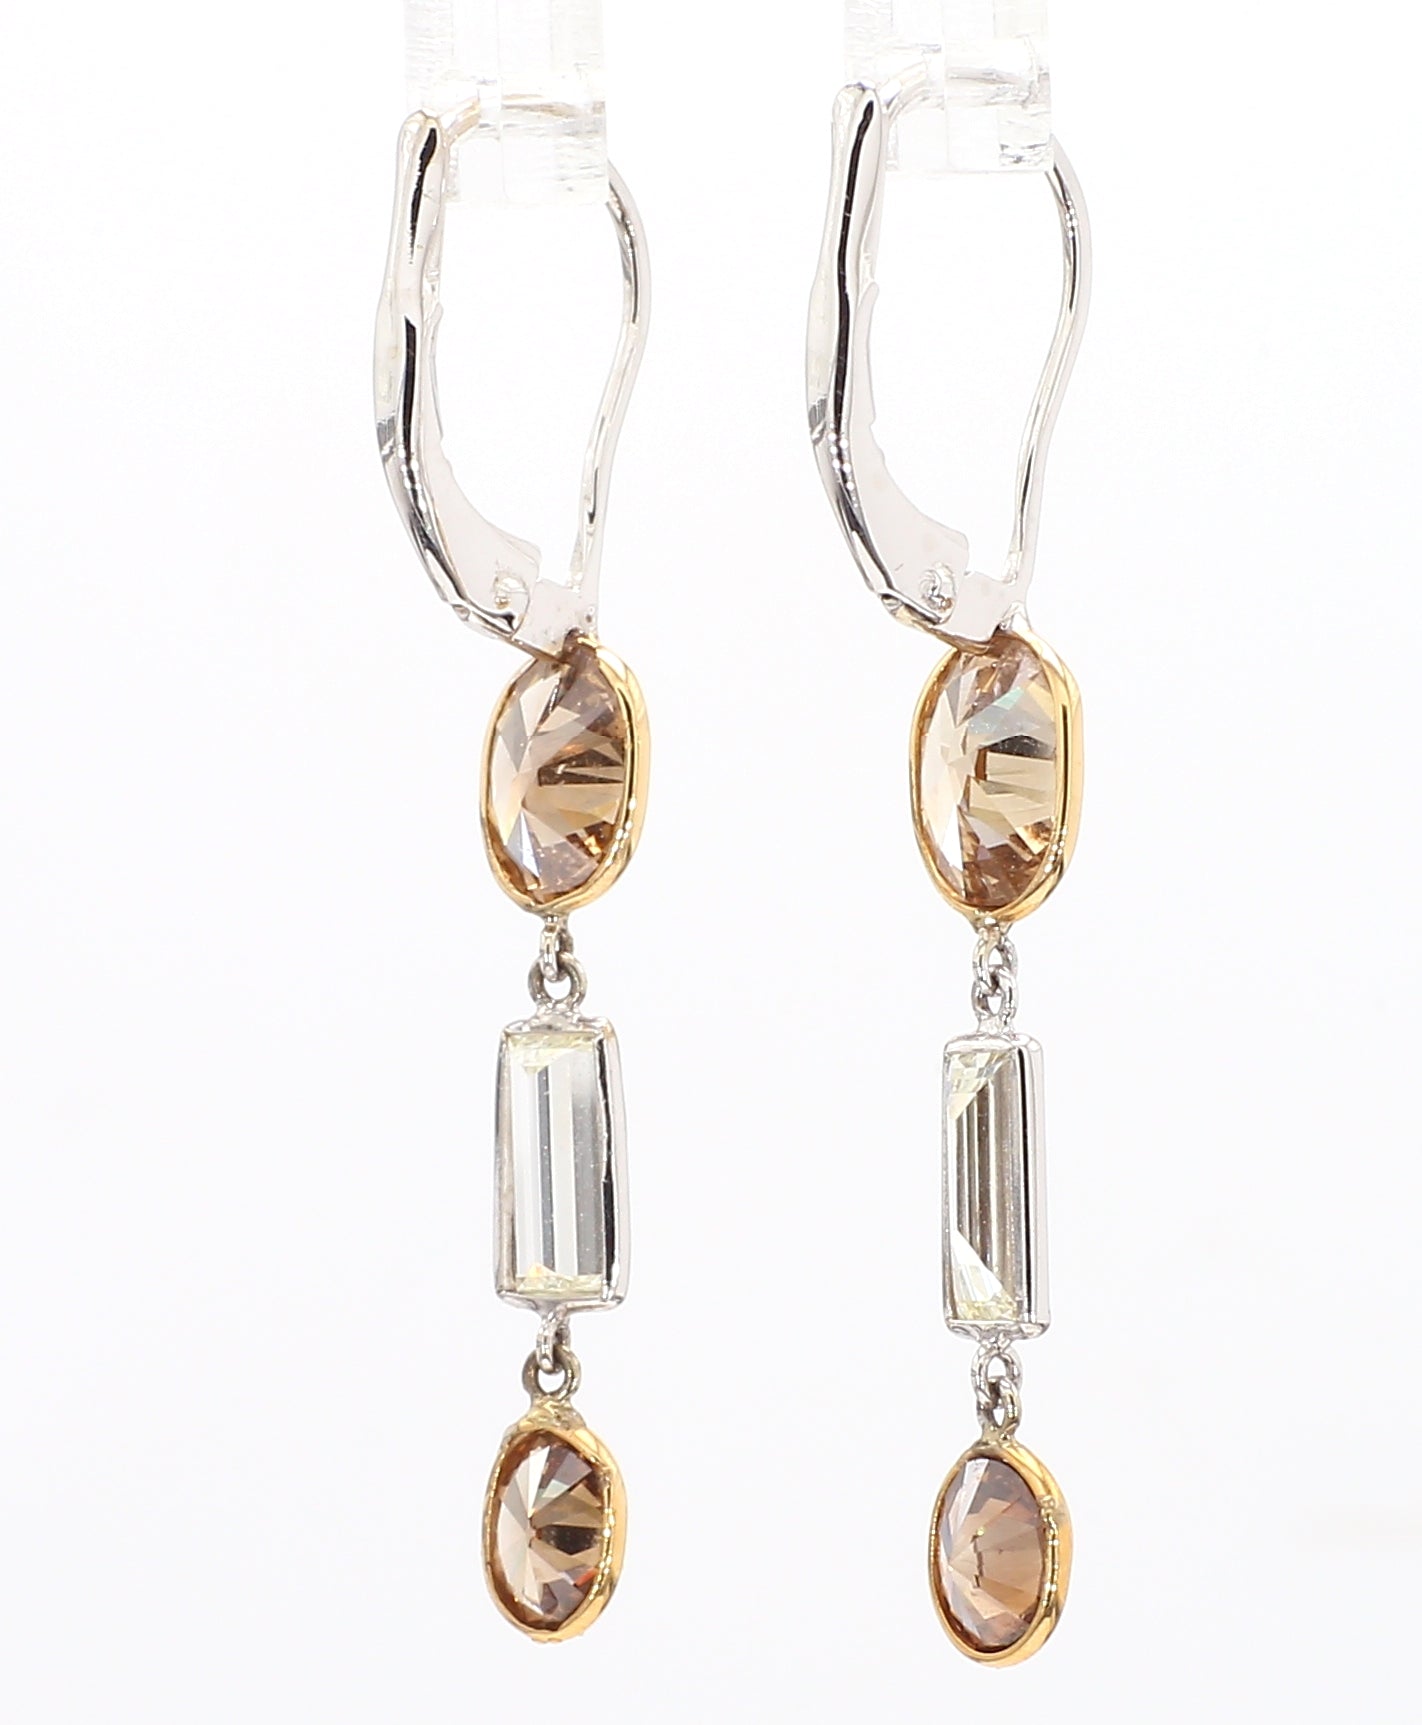 OVAL AND BAGUETTE DIAMOND EARRINGS, 2.73 CTTW, 18K TWO TONE